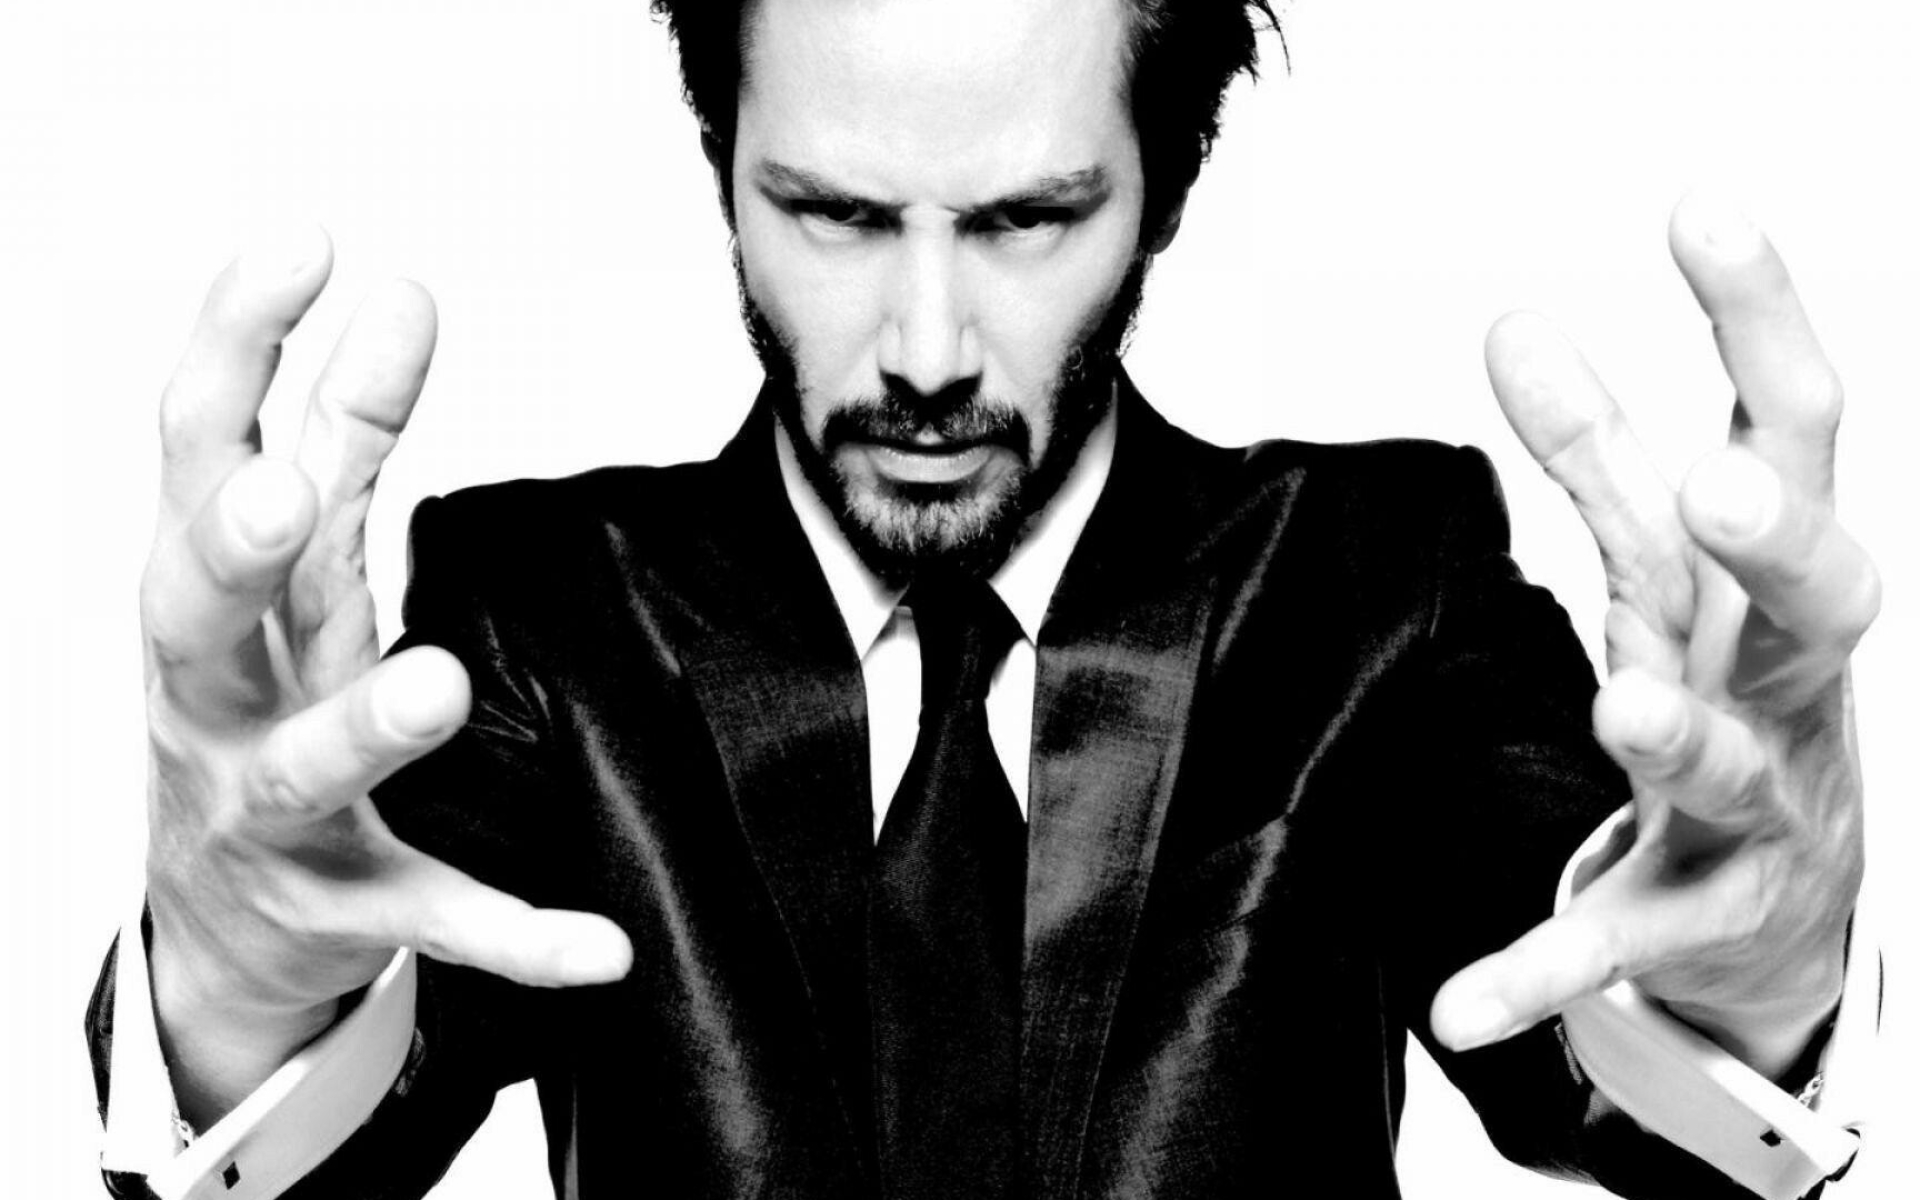 Keanu Reeves: Canadian actor, Known for his roles in Speed, Point Break, and The Matrix trilogy. 1920x1200 HD Wallpaper.